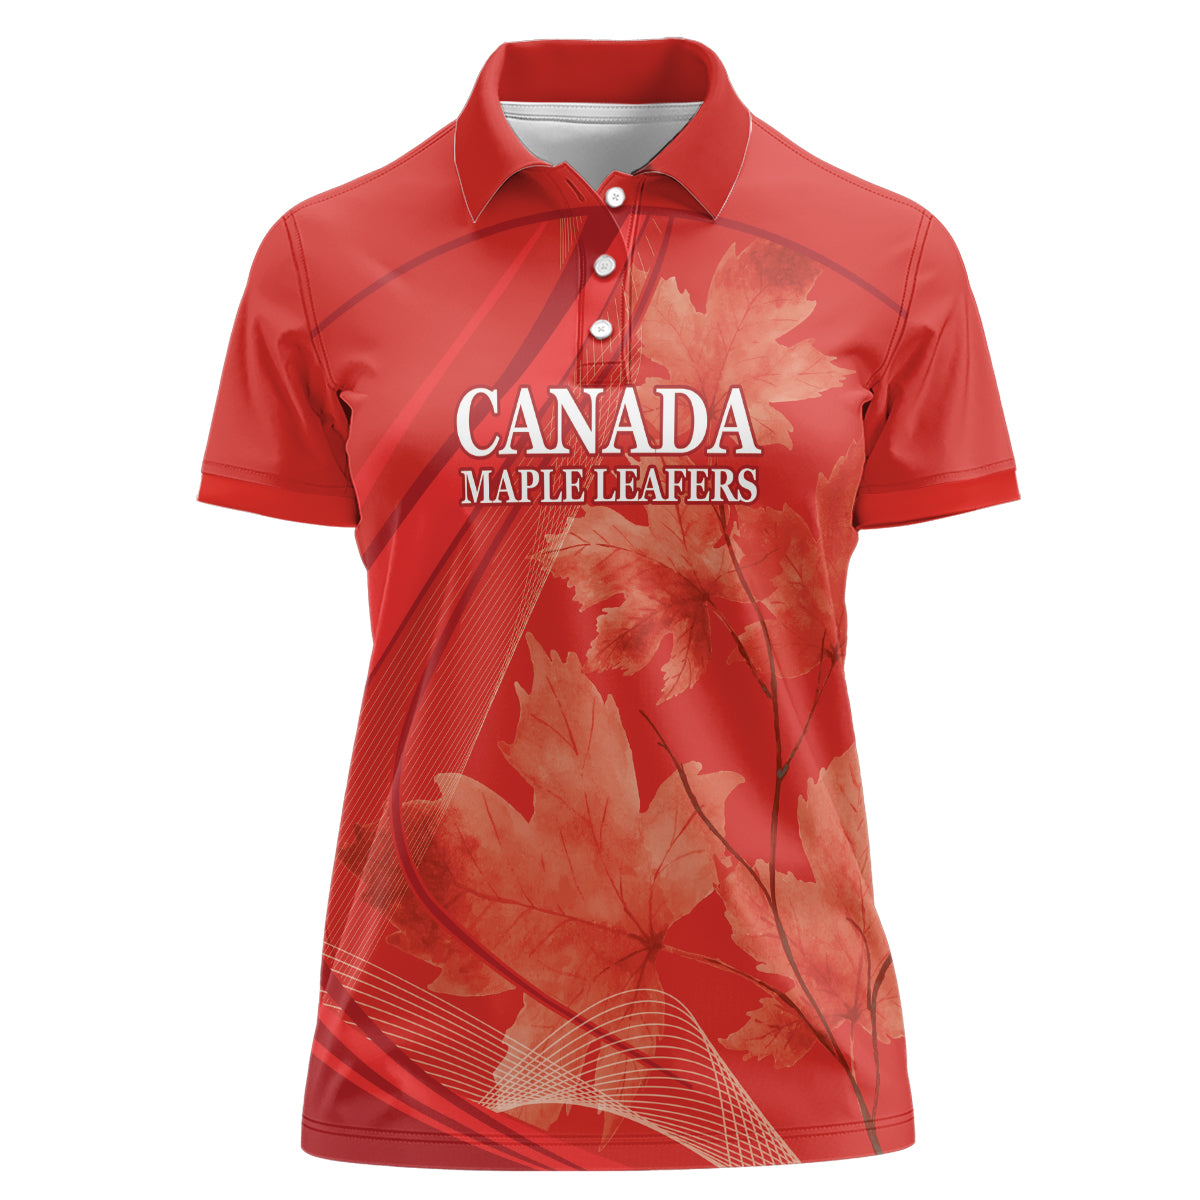 Canada Cricket World Cup 2024 Women Polo Shirt Maple Leafers Make Champions